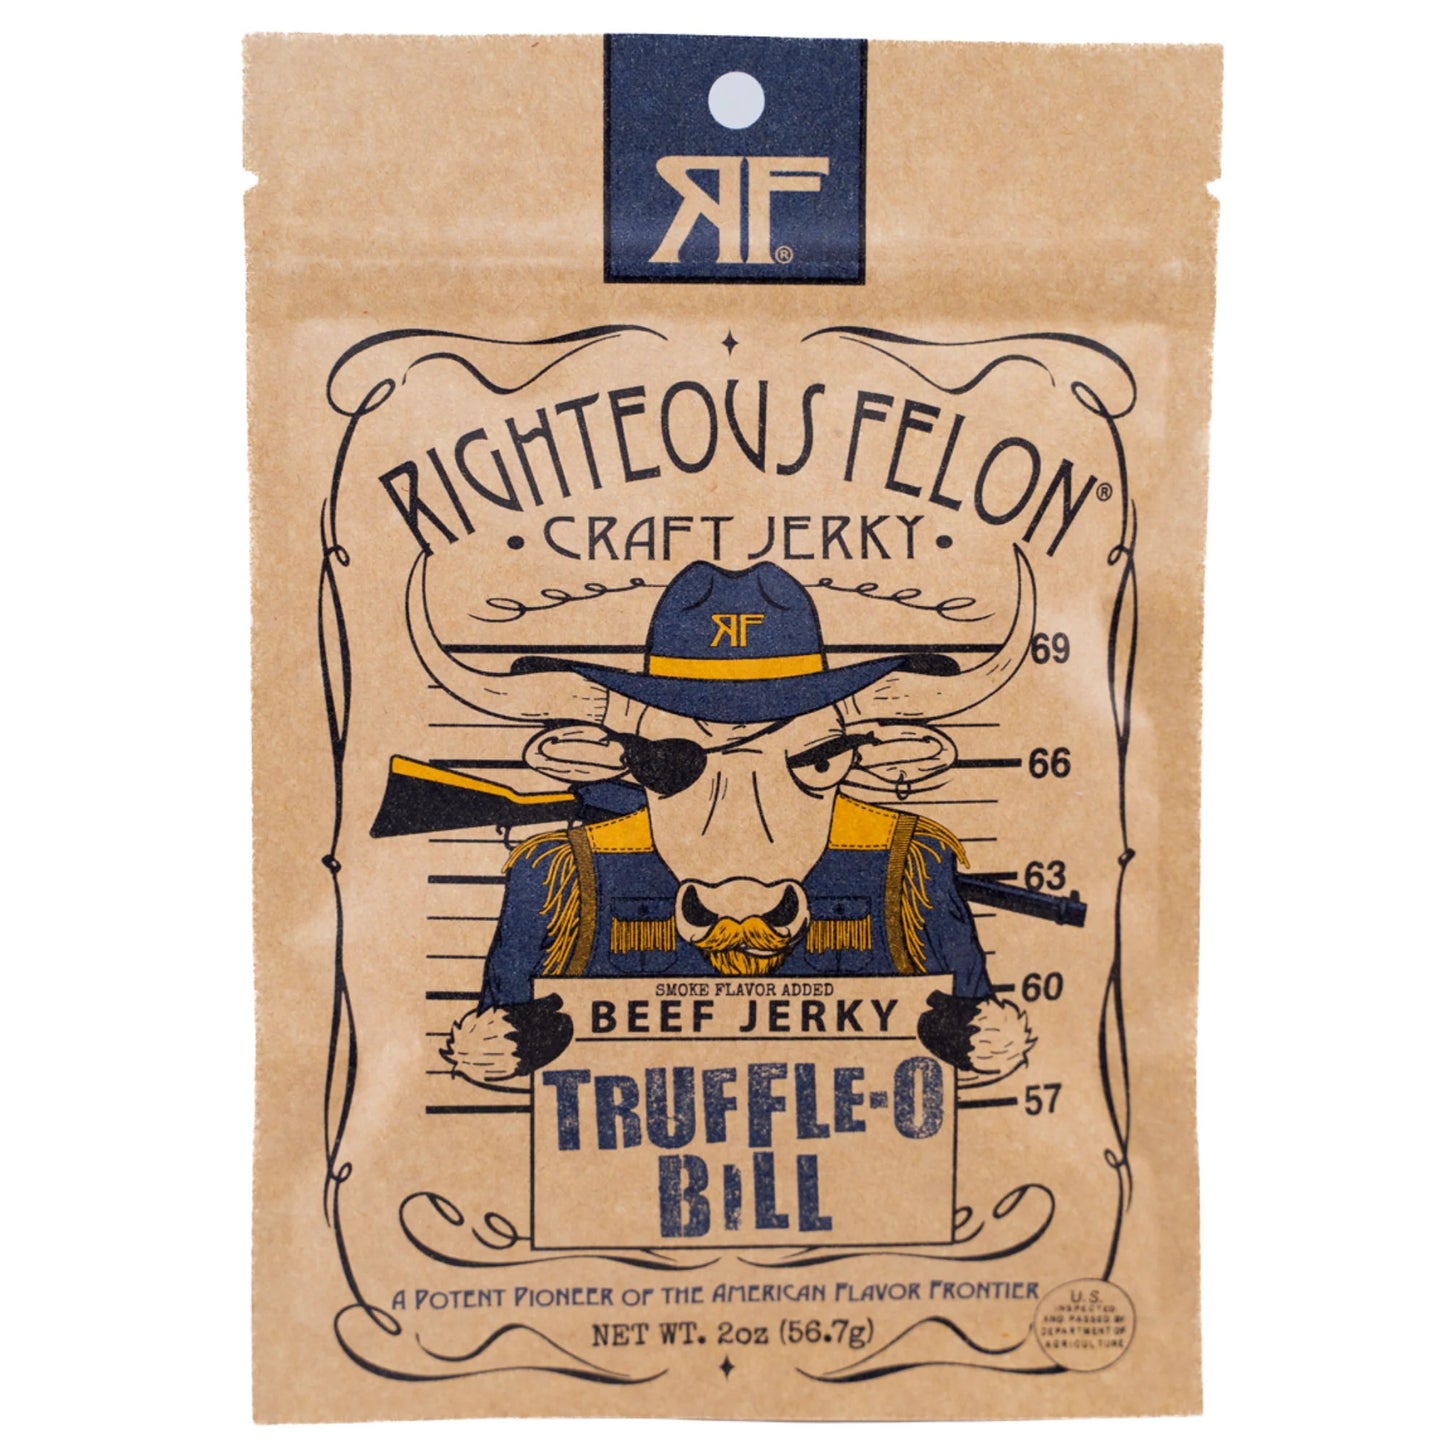 RIGHTEOUS FELON TRUFFLE-O SOLDIER BEEF JERKY 2OZ (8CT)